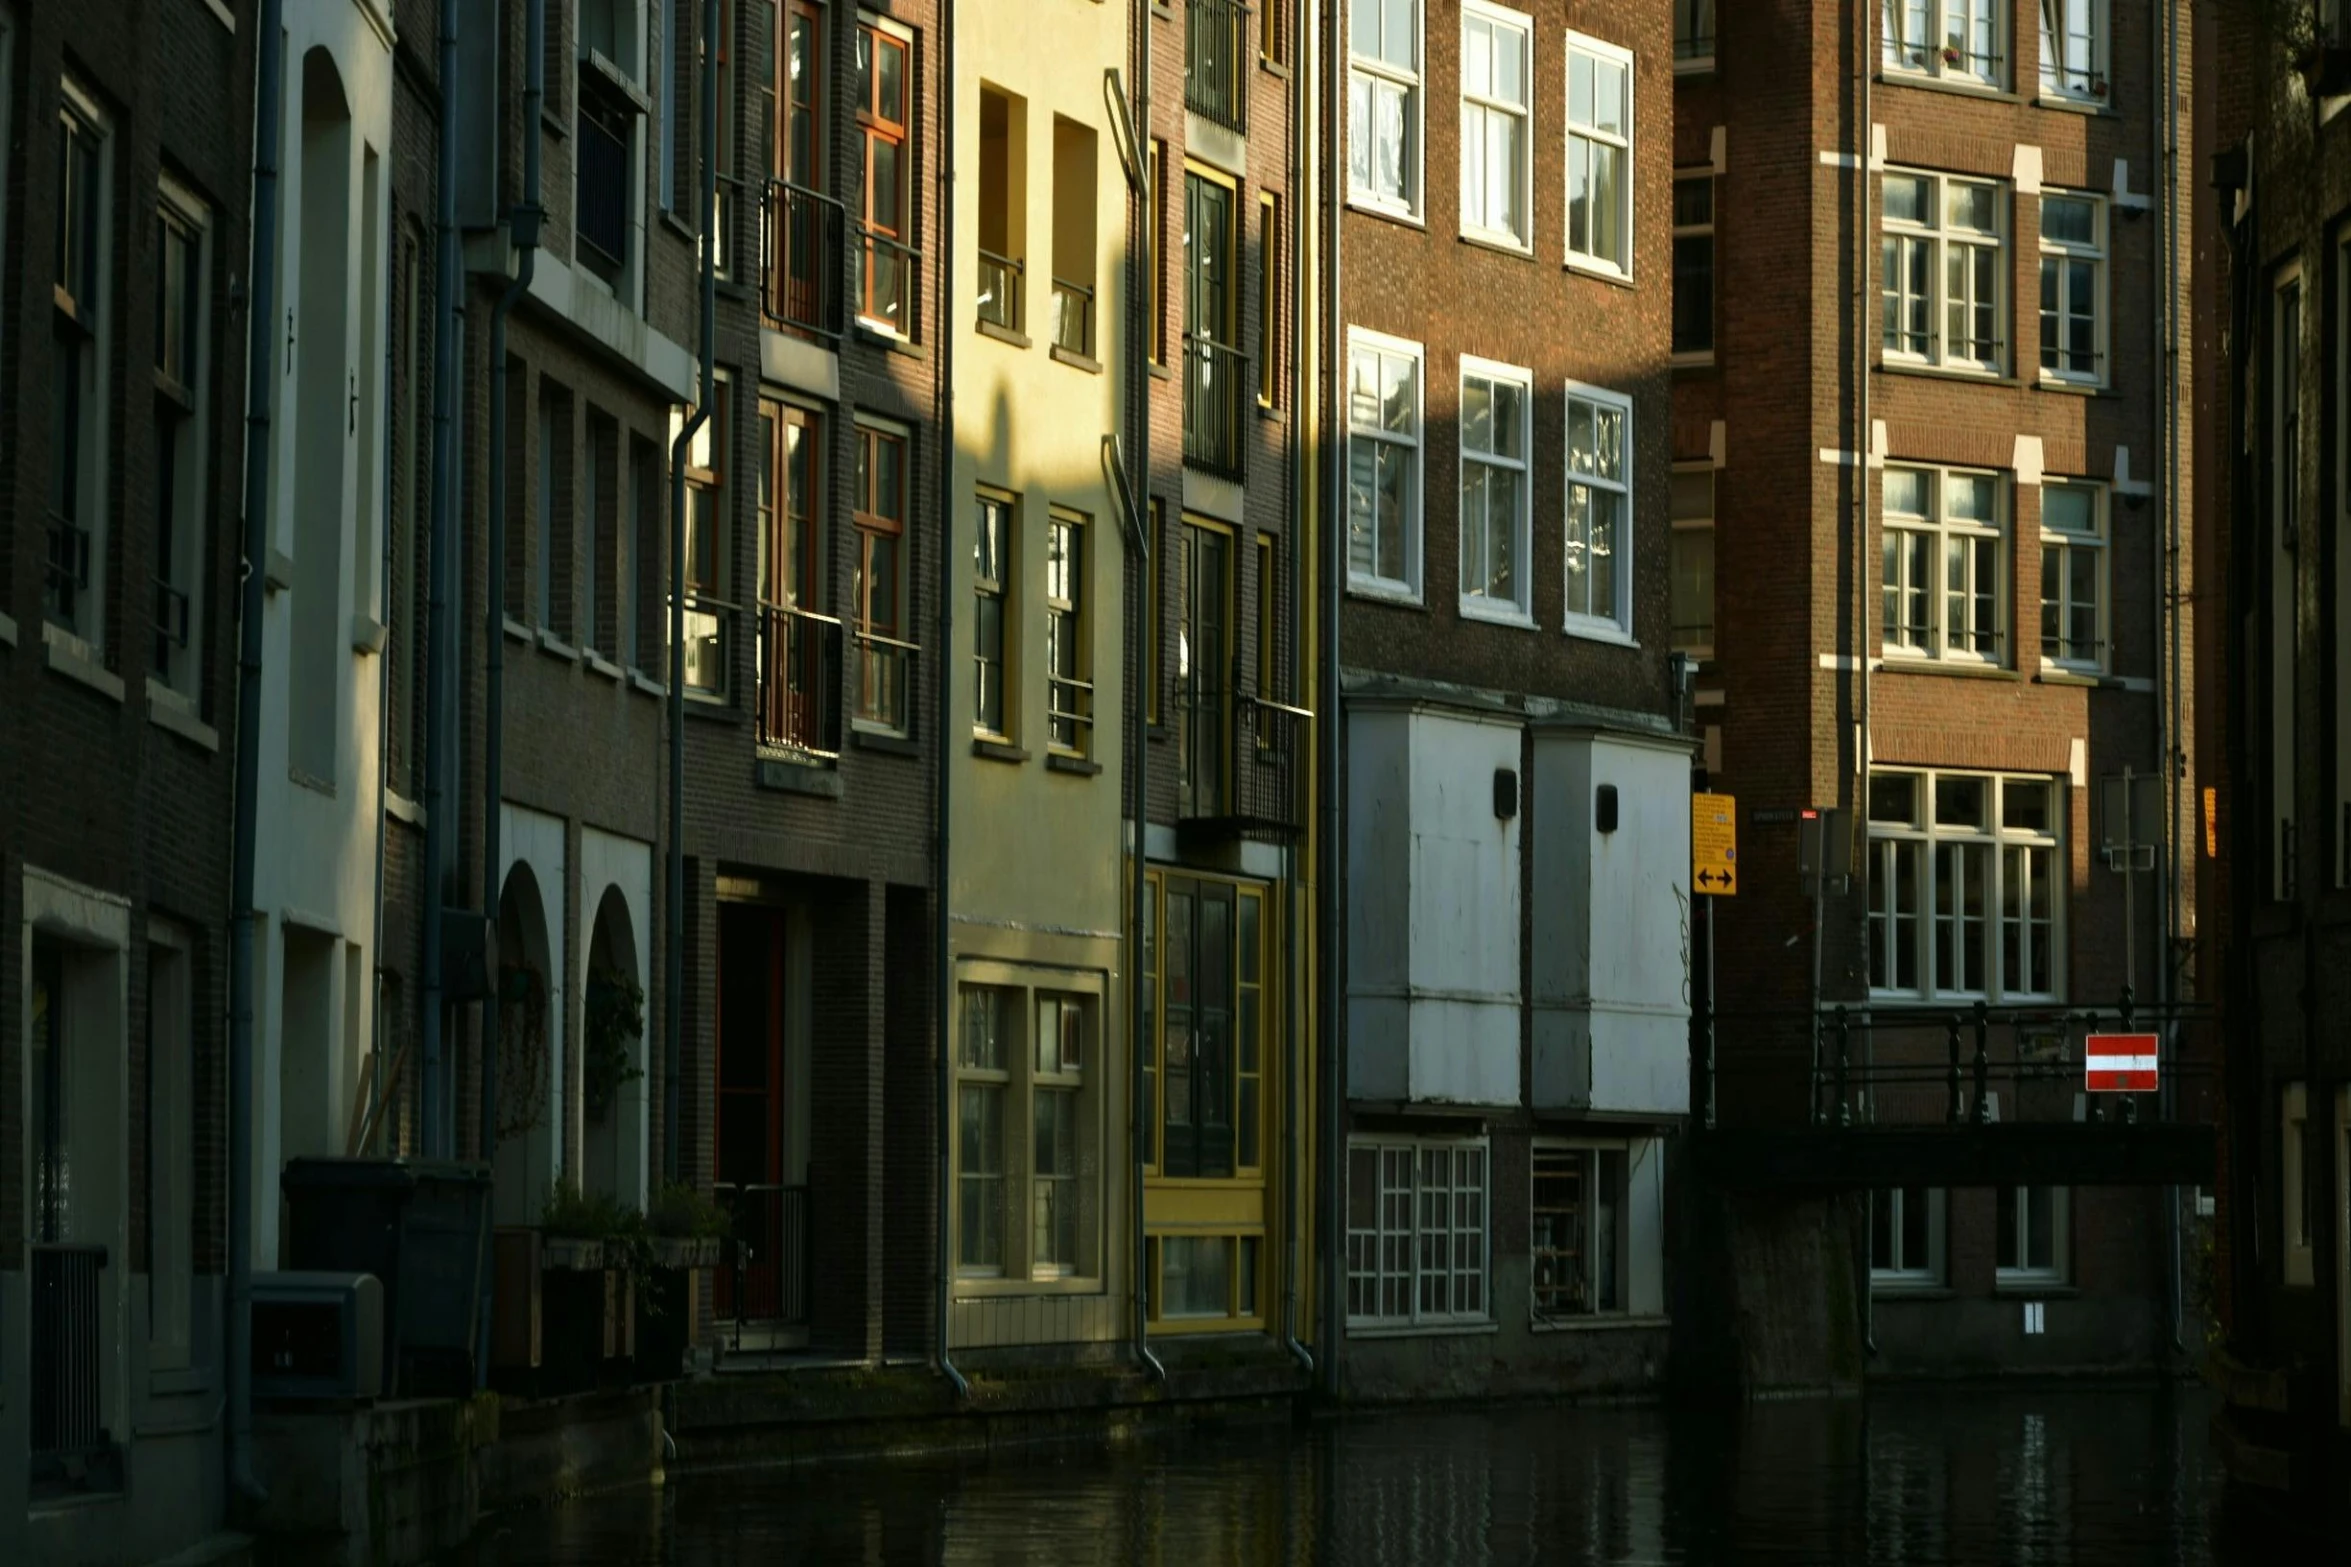 there are many old buildings along a waterway